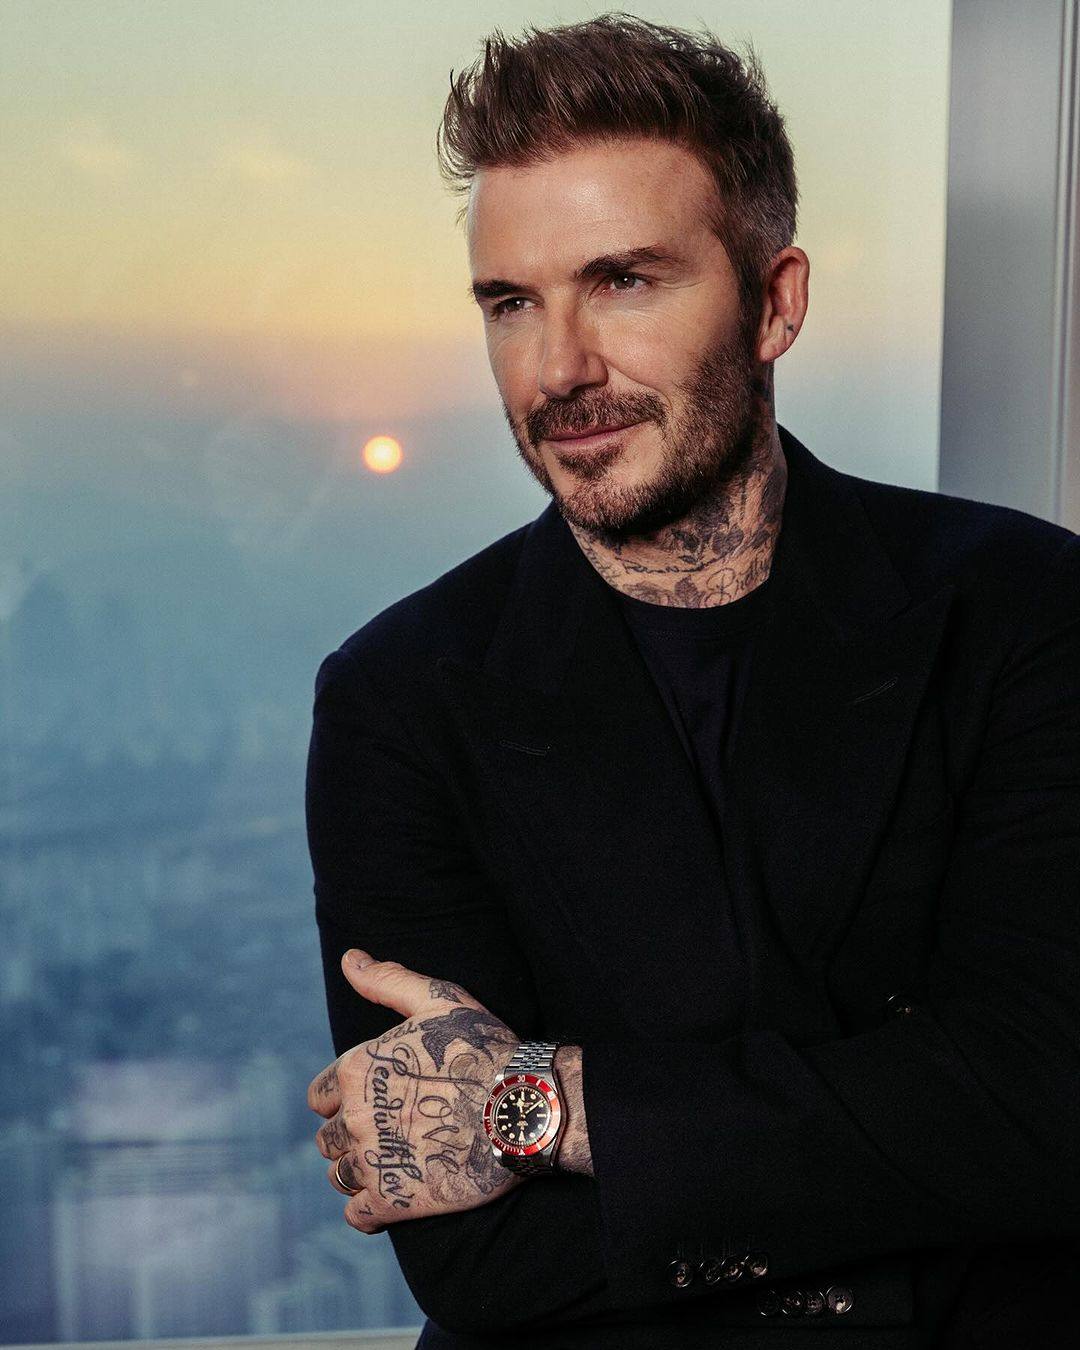 David Beckham supposedly “retired” in 2013 – so what has he been up to since? Photo: @davidbeckham/Instagram